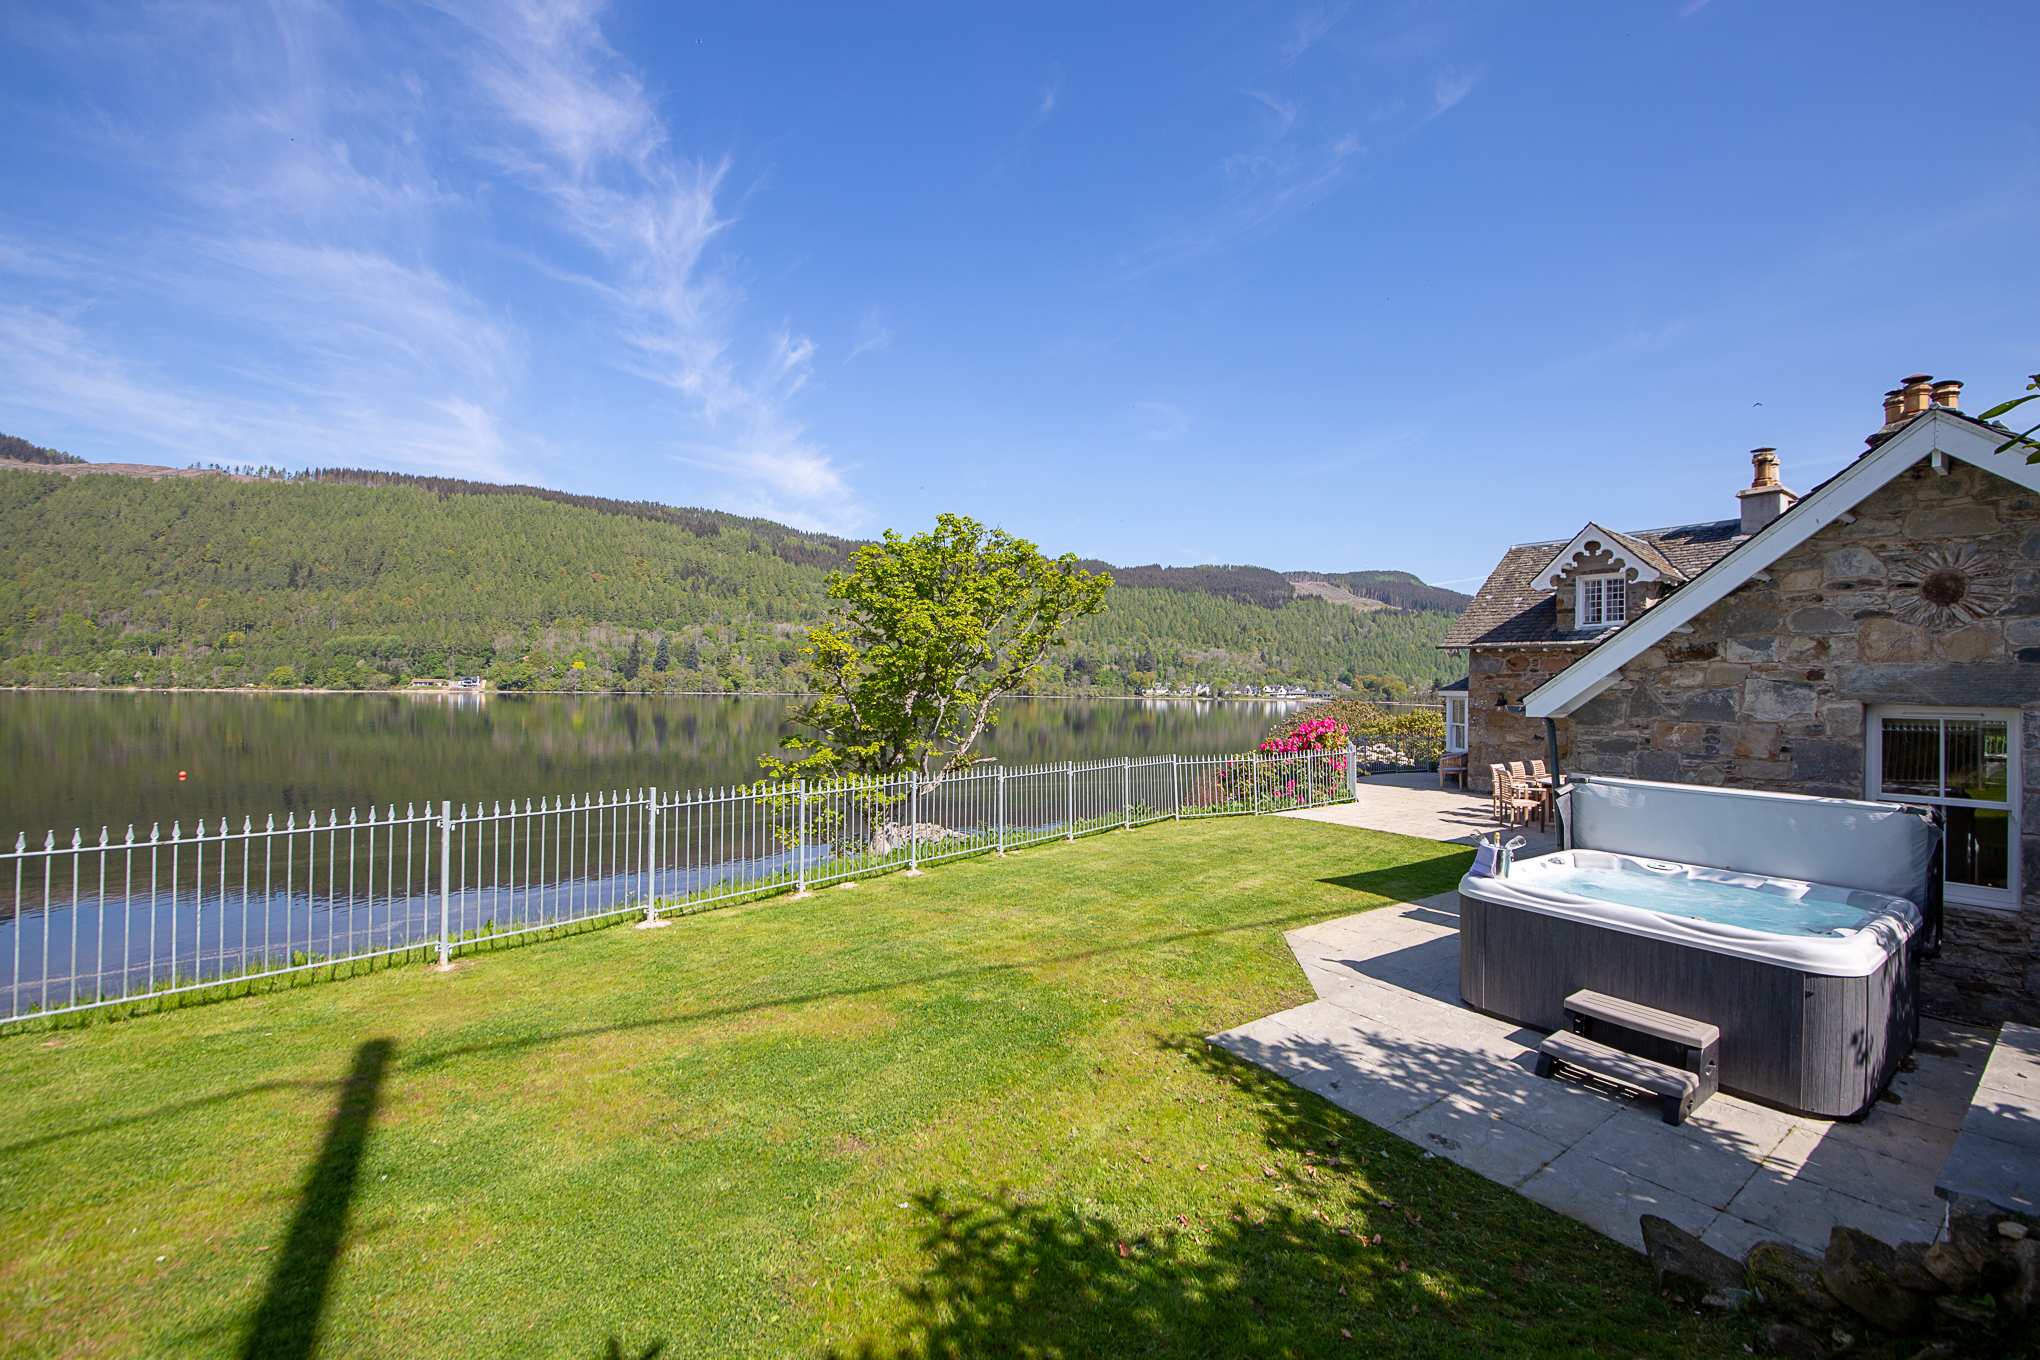 Image sourced from the Taymouth Marina Holiday Resort, Restaurant & Spa at: https://www.taymouthmarina.com/property/port-bane/